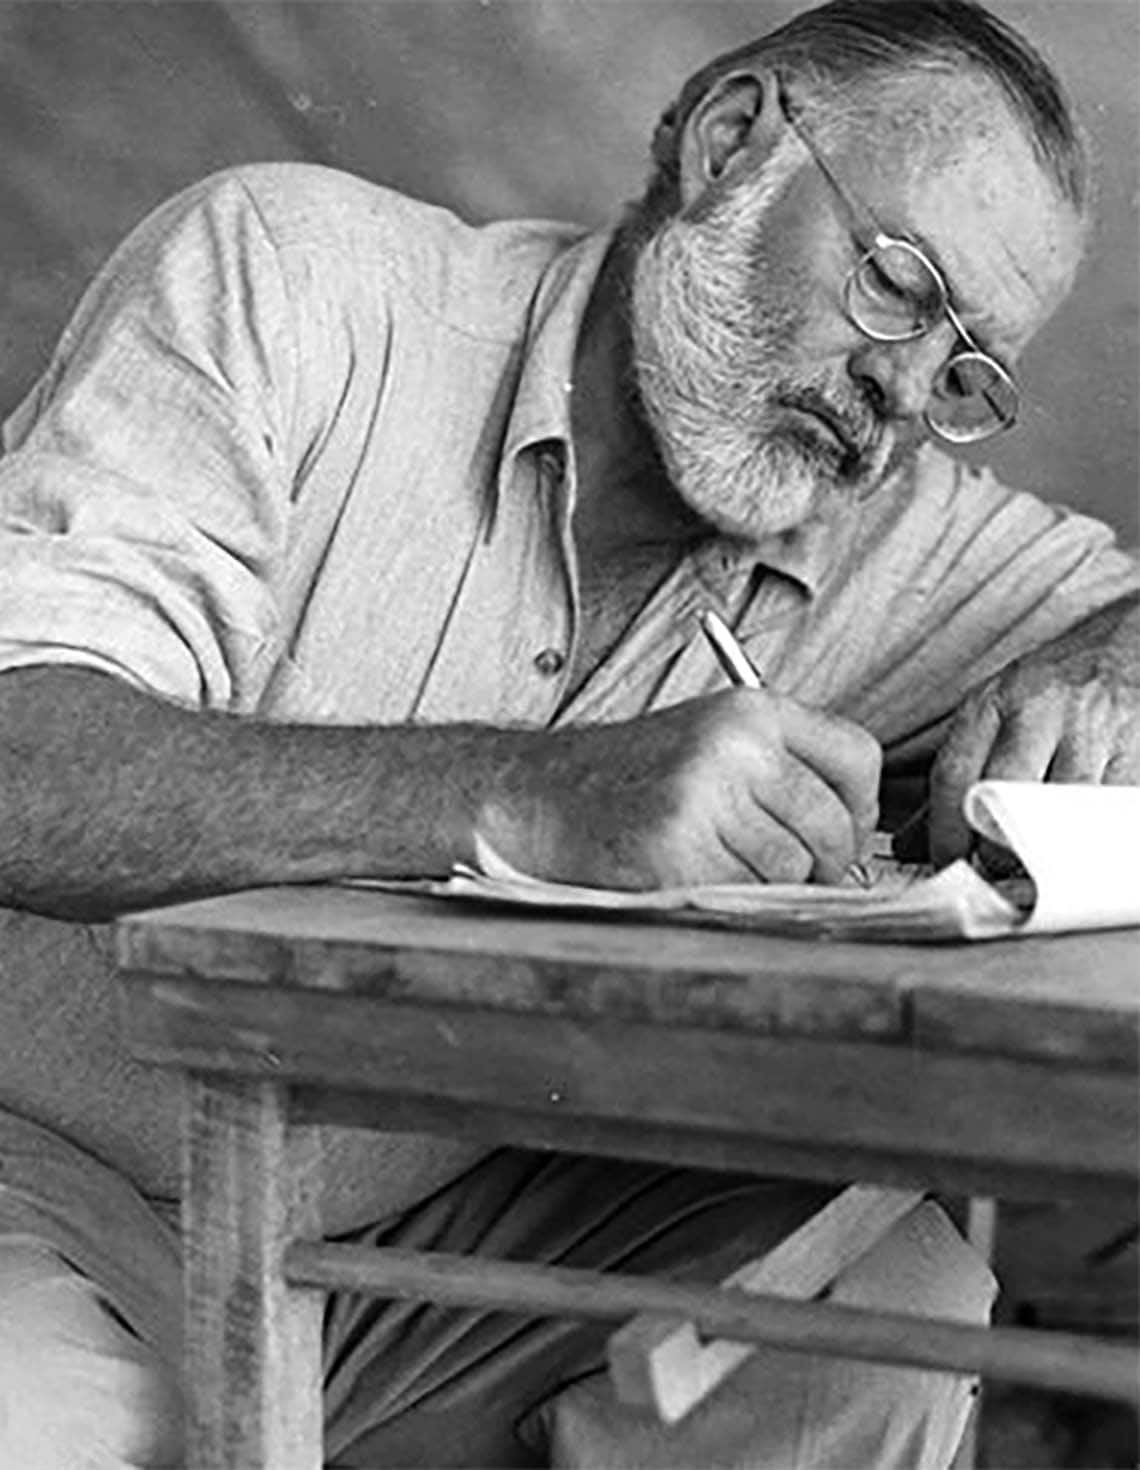 Ernest Hemingway was a successful author